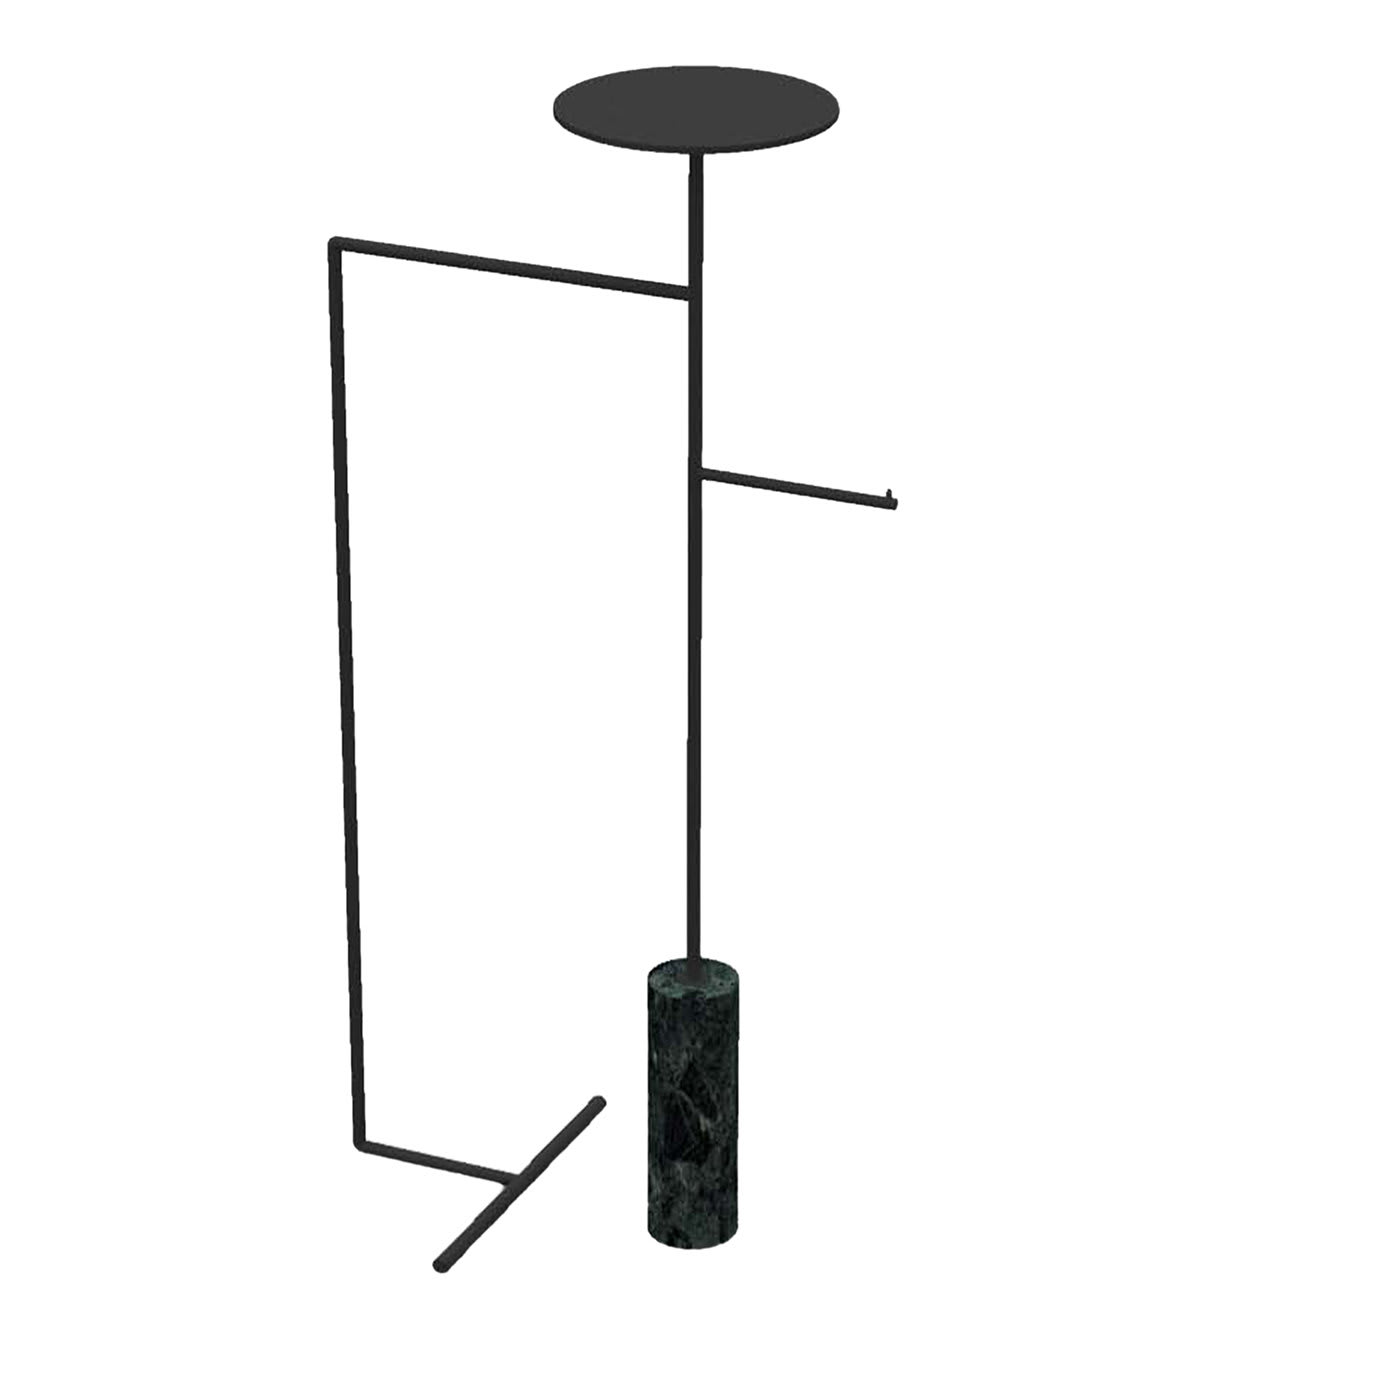 Stelo Green Guatemala and Black Coat Hanger with Stand - Nunzia Ponsillo